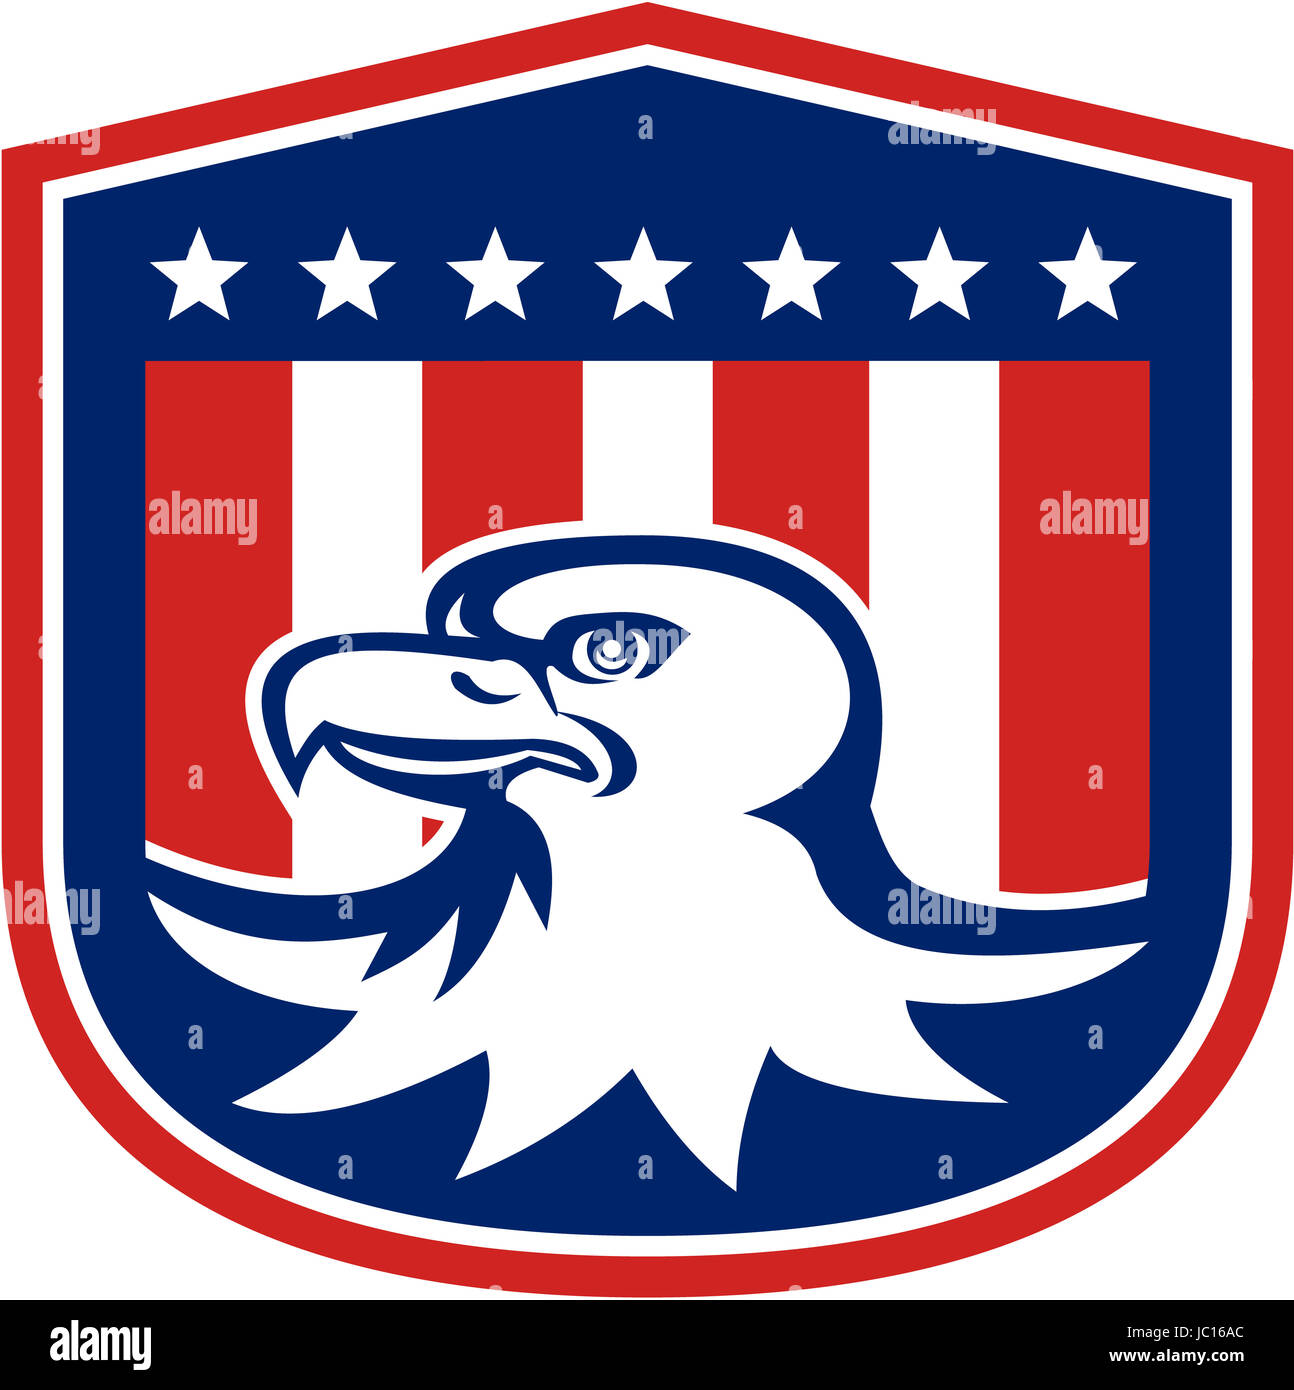 Illustration of a bald eagle head with american stars stripes flag set inside a shield crest done in retro style. Stock Photo